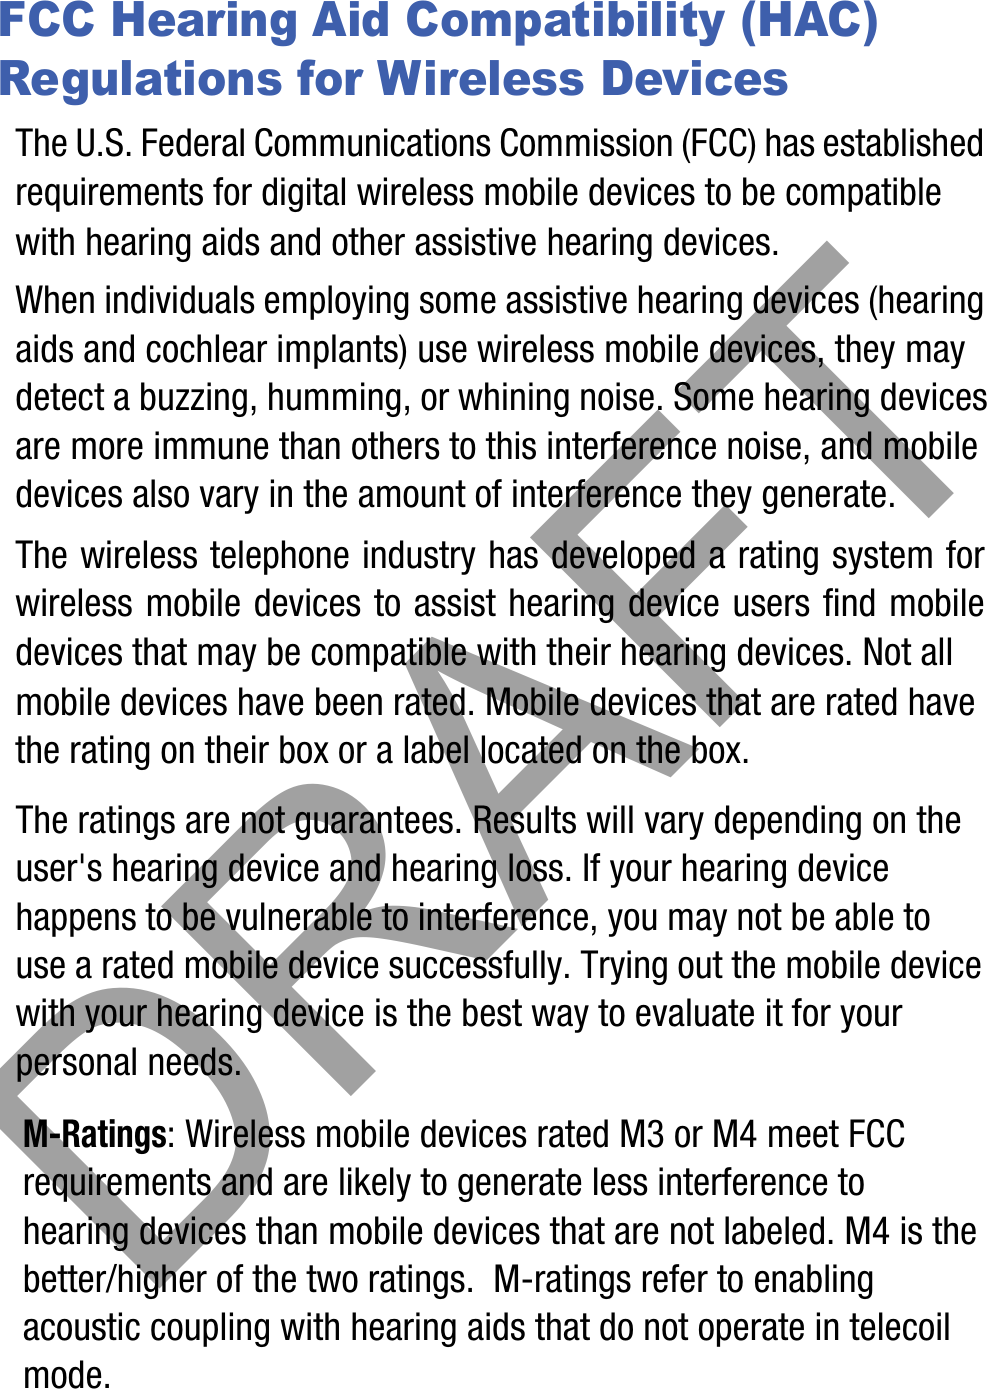 DRAFTFCC Hearing Aid Compatibility (HAC) Regulations for Wireless DevicesThe U.S. Federal Communications Commission (FCC) has established requirements for digital wireless mobile devices to be compatible with hearing aids and other assistive hearing devices.When individuals employing some assistive hearing devices (hearing aids and cochlear implants) use wireless mobile devices, they may detect a buzzing, humming, or whining noise. Some hearing devices are more immune than others to this interference noise, and mobile devices also vary in the amount of interference they generate.The wireless telephone industry has developed a rating system for wireless mobile devices to assist hearing device users find mobile devices that may be compatible with their hearing devices. Not all mobile devices have been rated. Mobile devices that are rated have the rating on their box or a label located on the box.The ratings are not guarantees. Results will vary depending on the user&apos;s hearing device and hearing loss. If your hearing device happens to be vulnerable to interference, you may not be able to use a rated mobile device successfully. Trying out the mobile device with your hearing device is the best way to evaluate it for your personal needs.M-Ratings: Wireless mobile devices rated M3 or M4 meet FCC requirements and are likely to generate less interference to hearing devices than mobile devices that are not labeled. M4 is the better/higher of the two ratings.  M-ratings refer to enabling acoustic coupling with hearing aids that do not operate in telecoil mode.